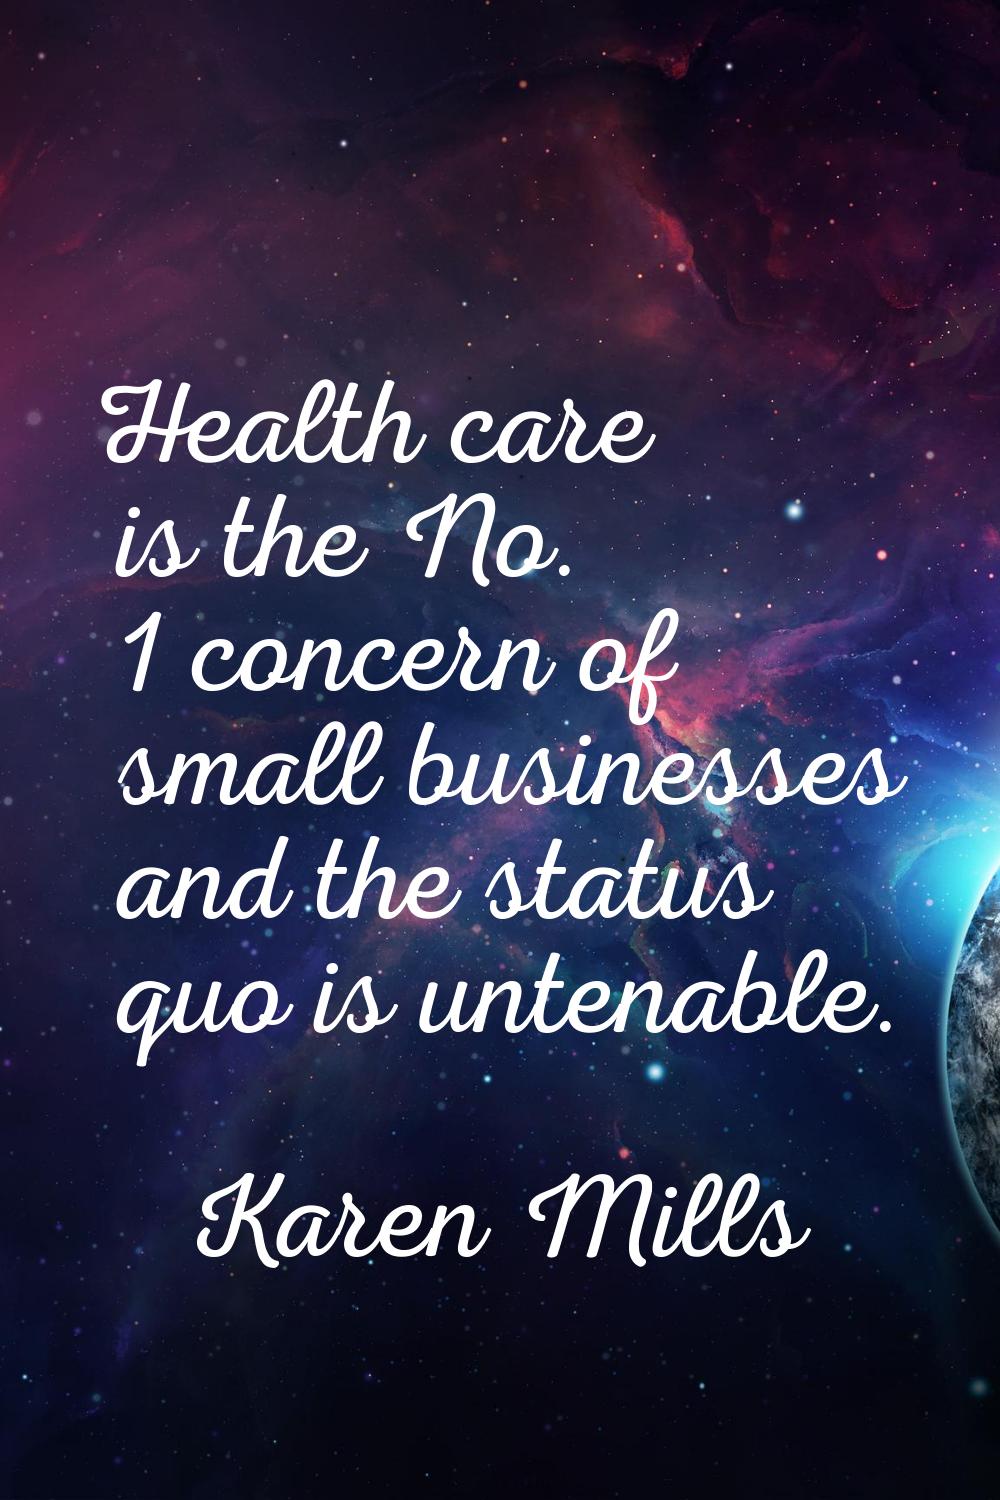 Health care is the No. 1 concern of small businesses and the status quo is untenable.